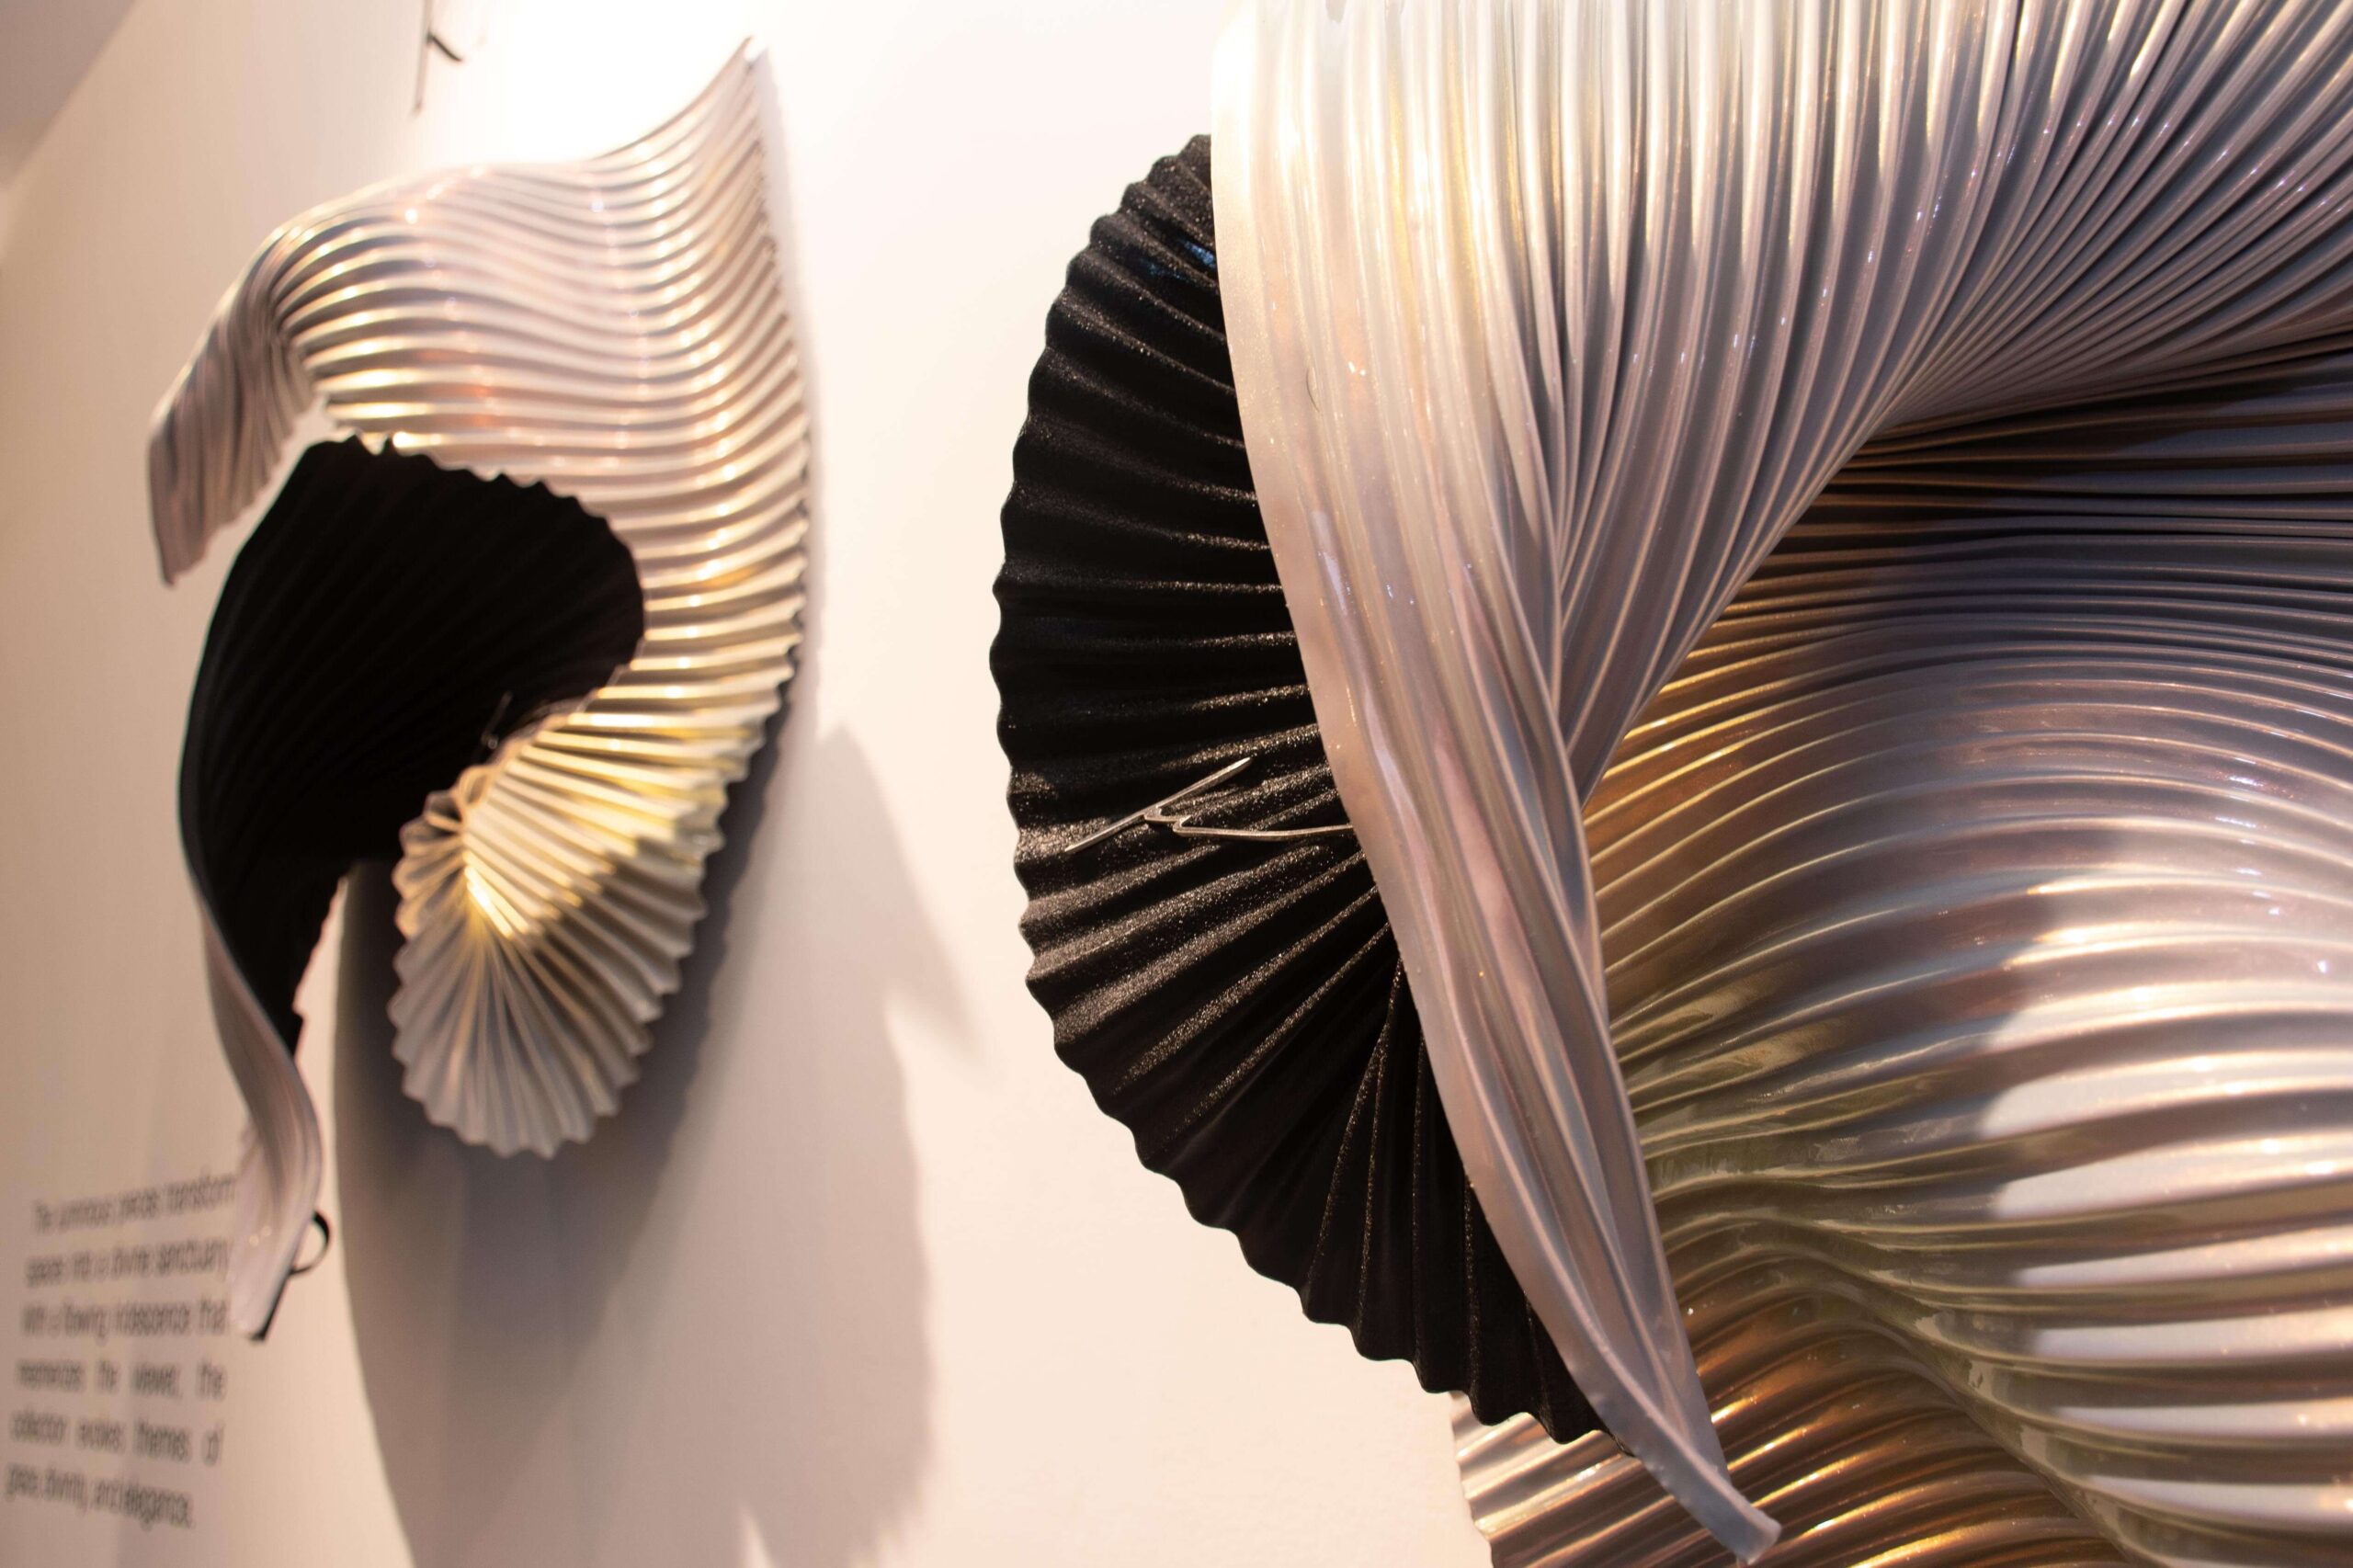 A close look at Cuenca's twisting, dynamic pieces